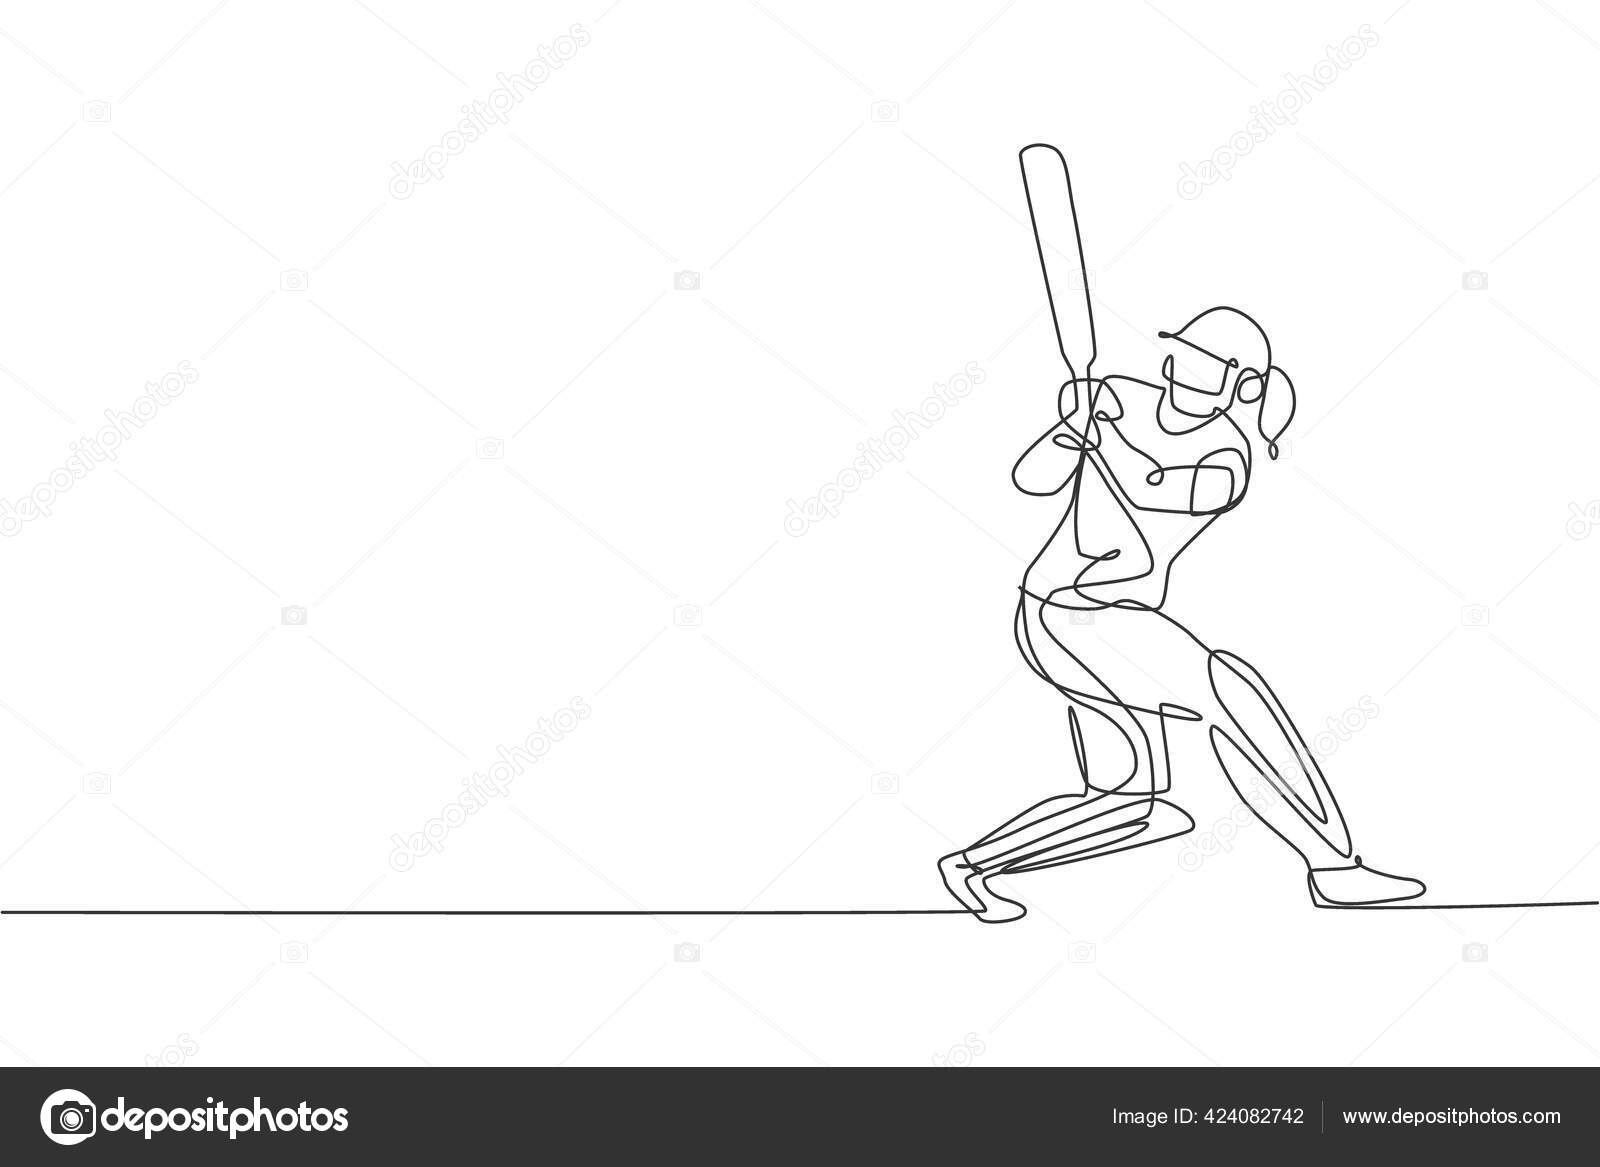 How To Draw A Cricket Player - YouTube